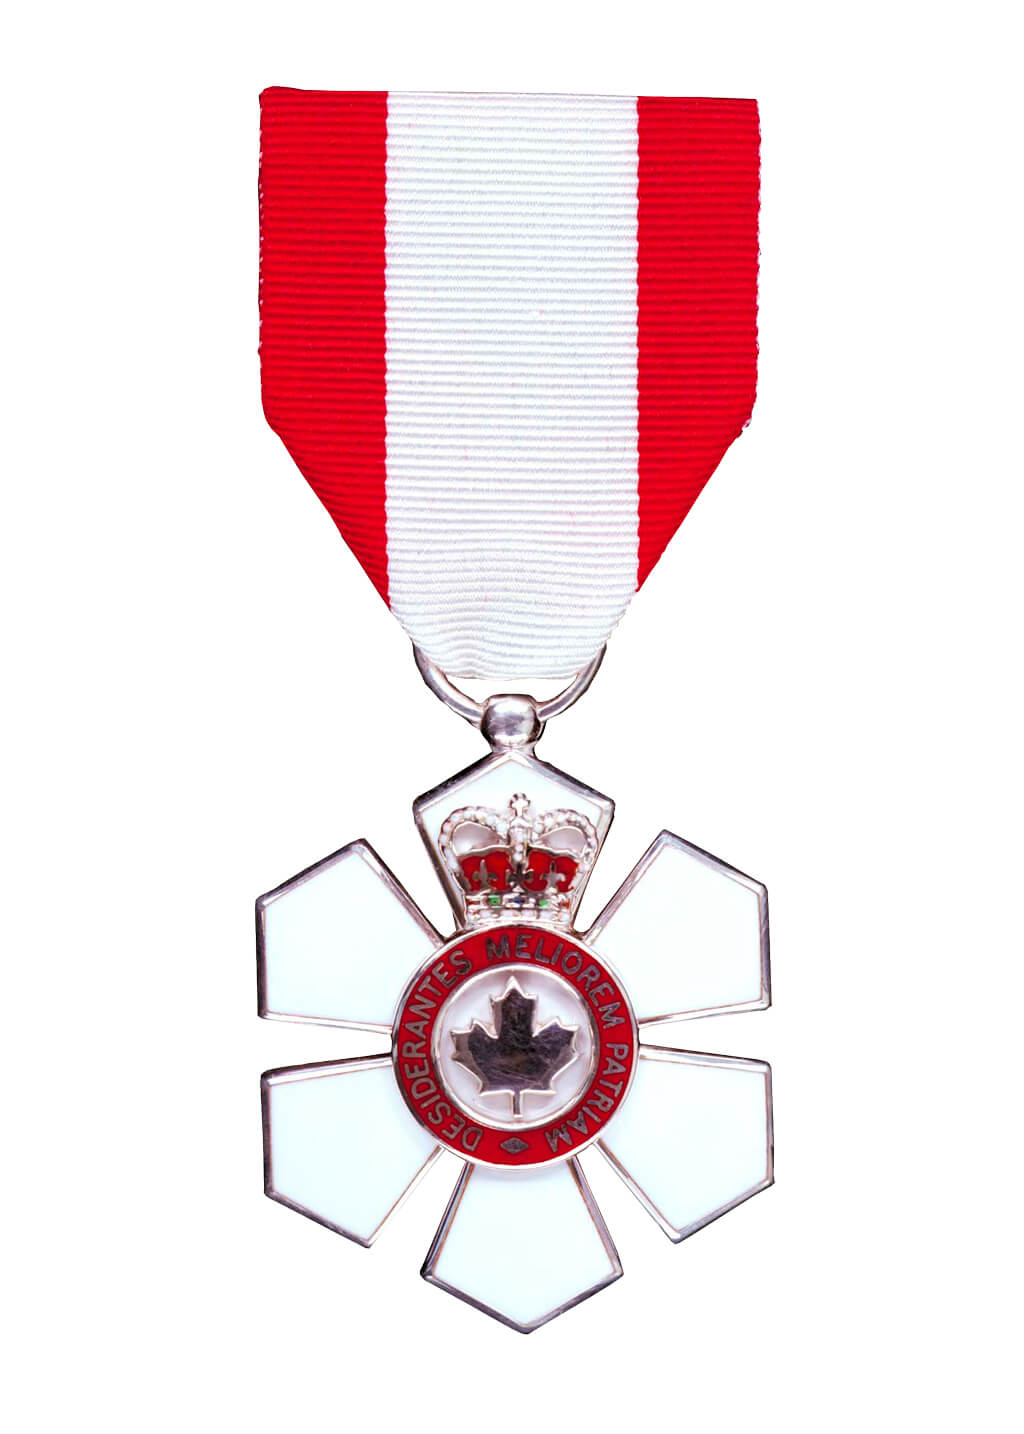 An image of a Canadian medal award appointed by the Order of Canada